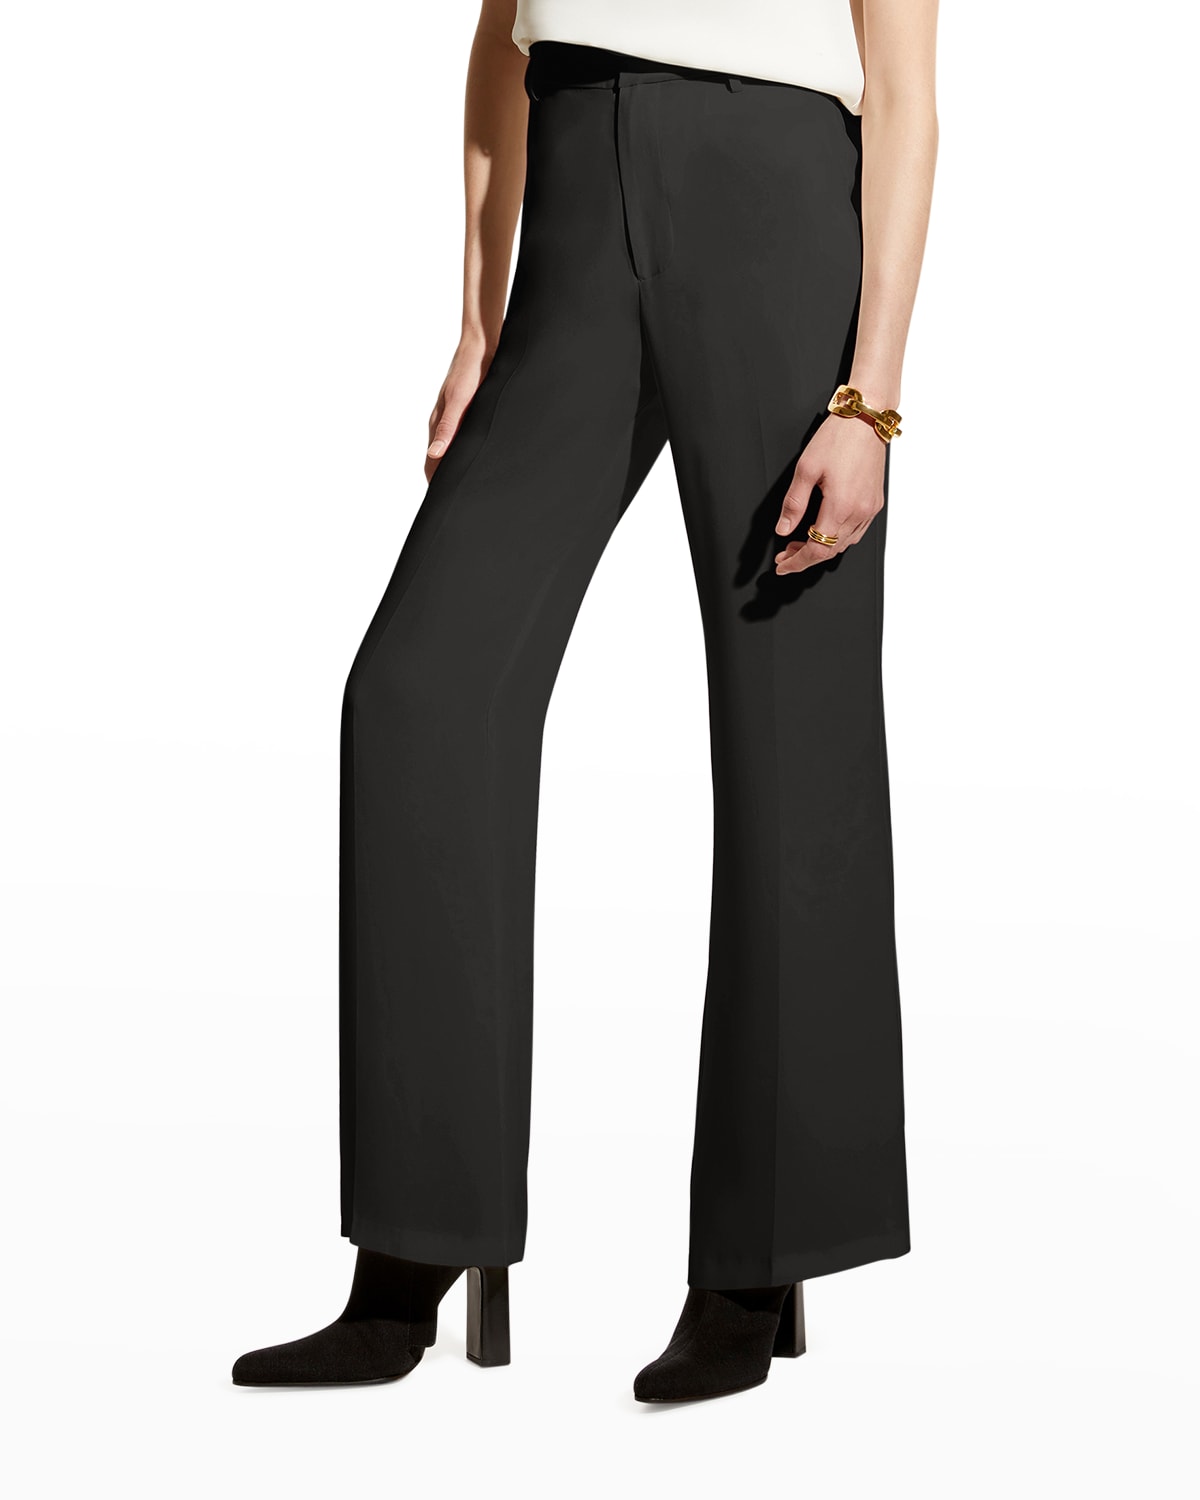 CARESTE Piper Mid-Rise Flared Pants